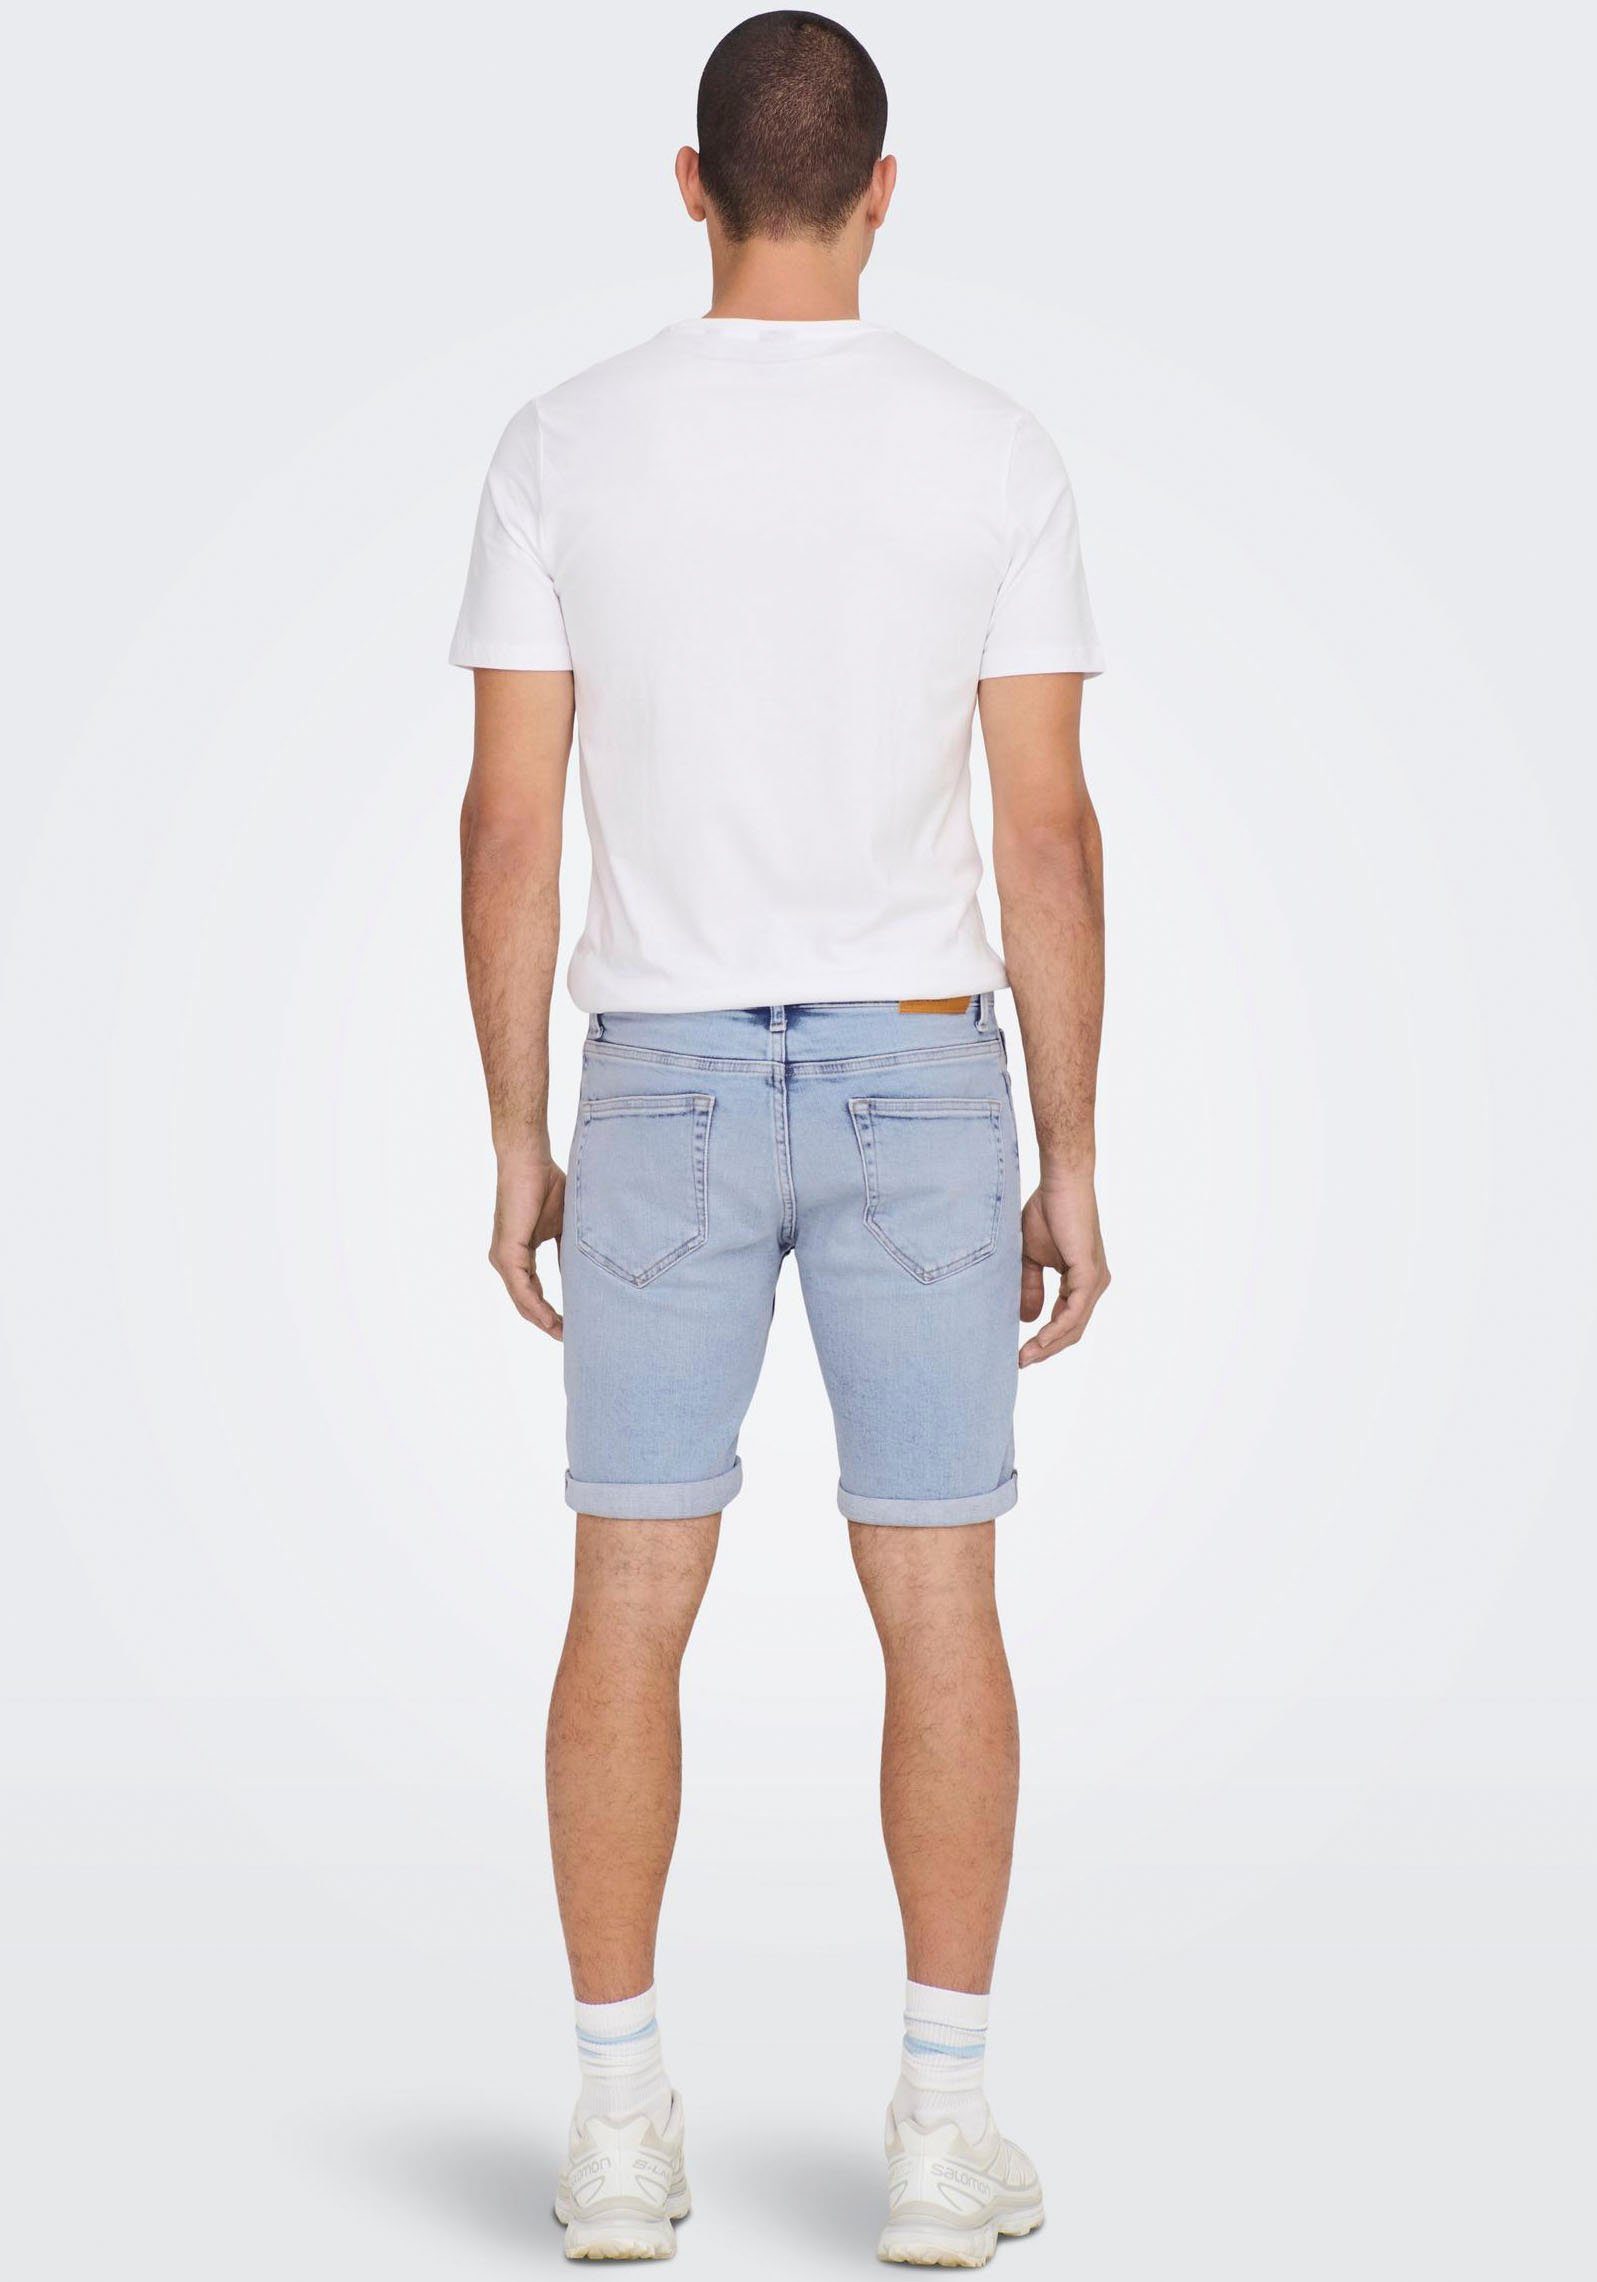 SONS Blue DNM LIGHT Jeansshorts Light SHORTS ONSPLY 5189 BLUE & NOOS ONLY Denim